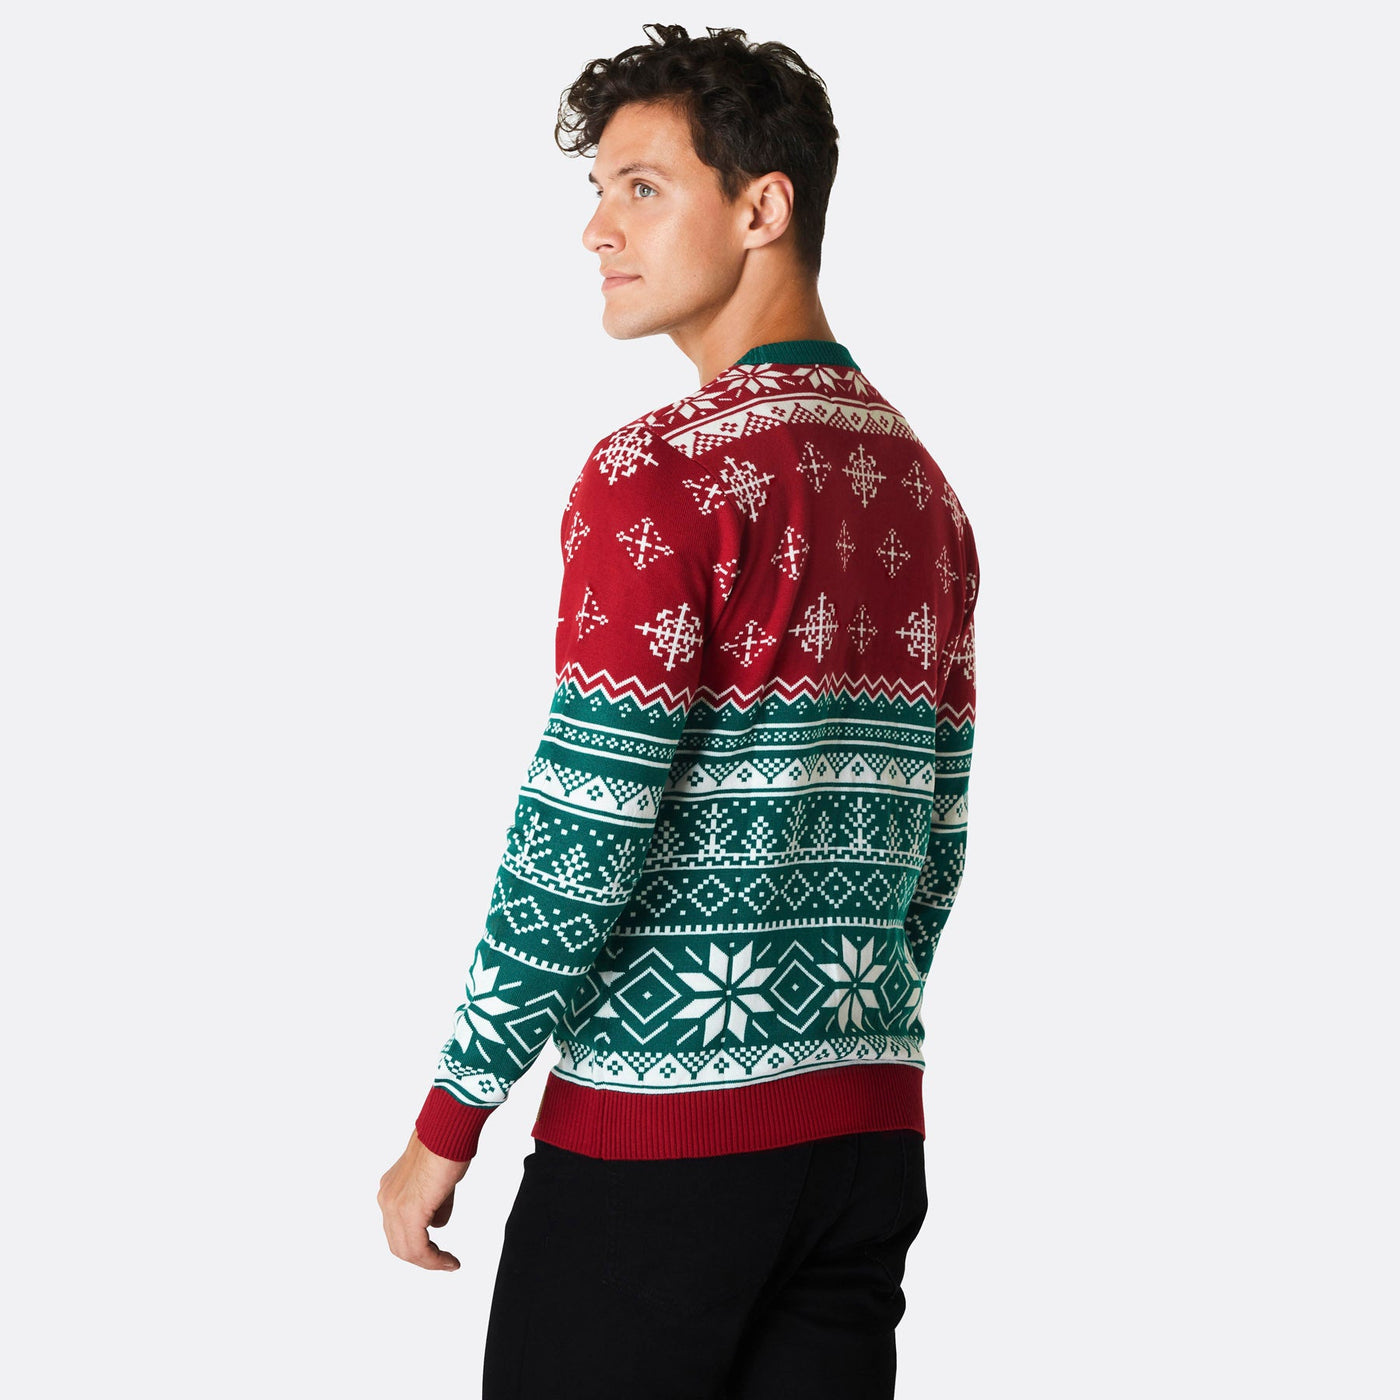 Men's Filthy Animal Christmas Sweater